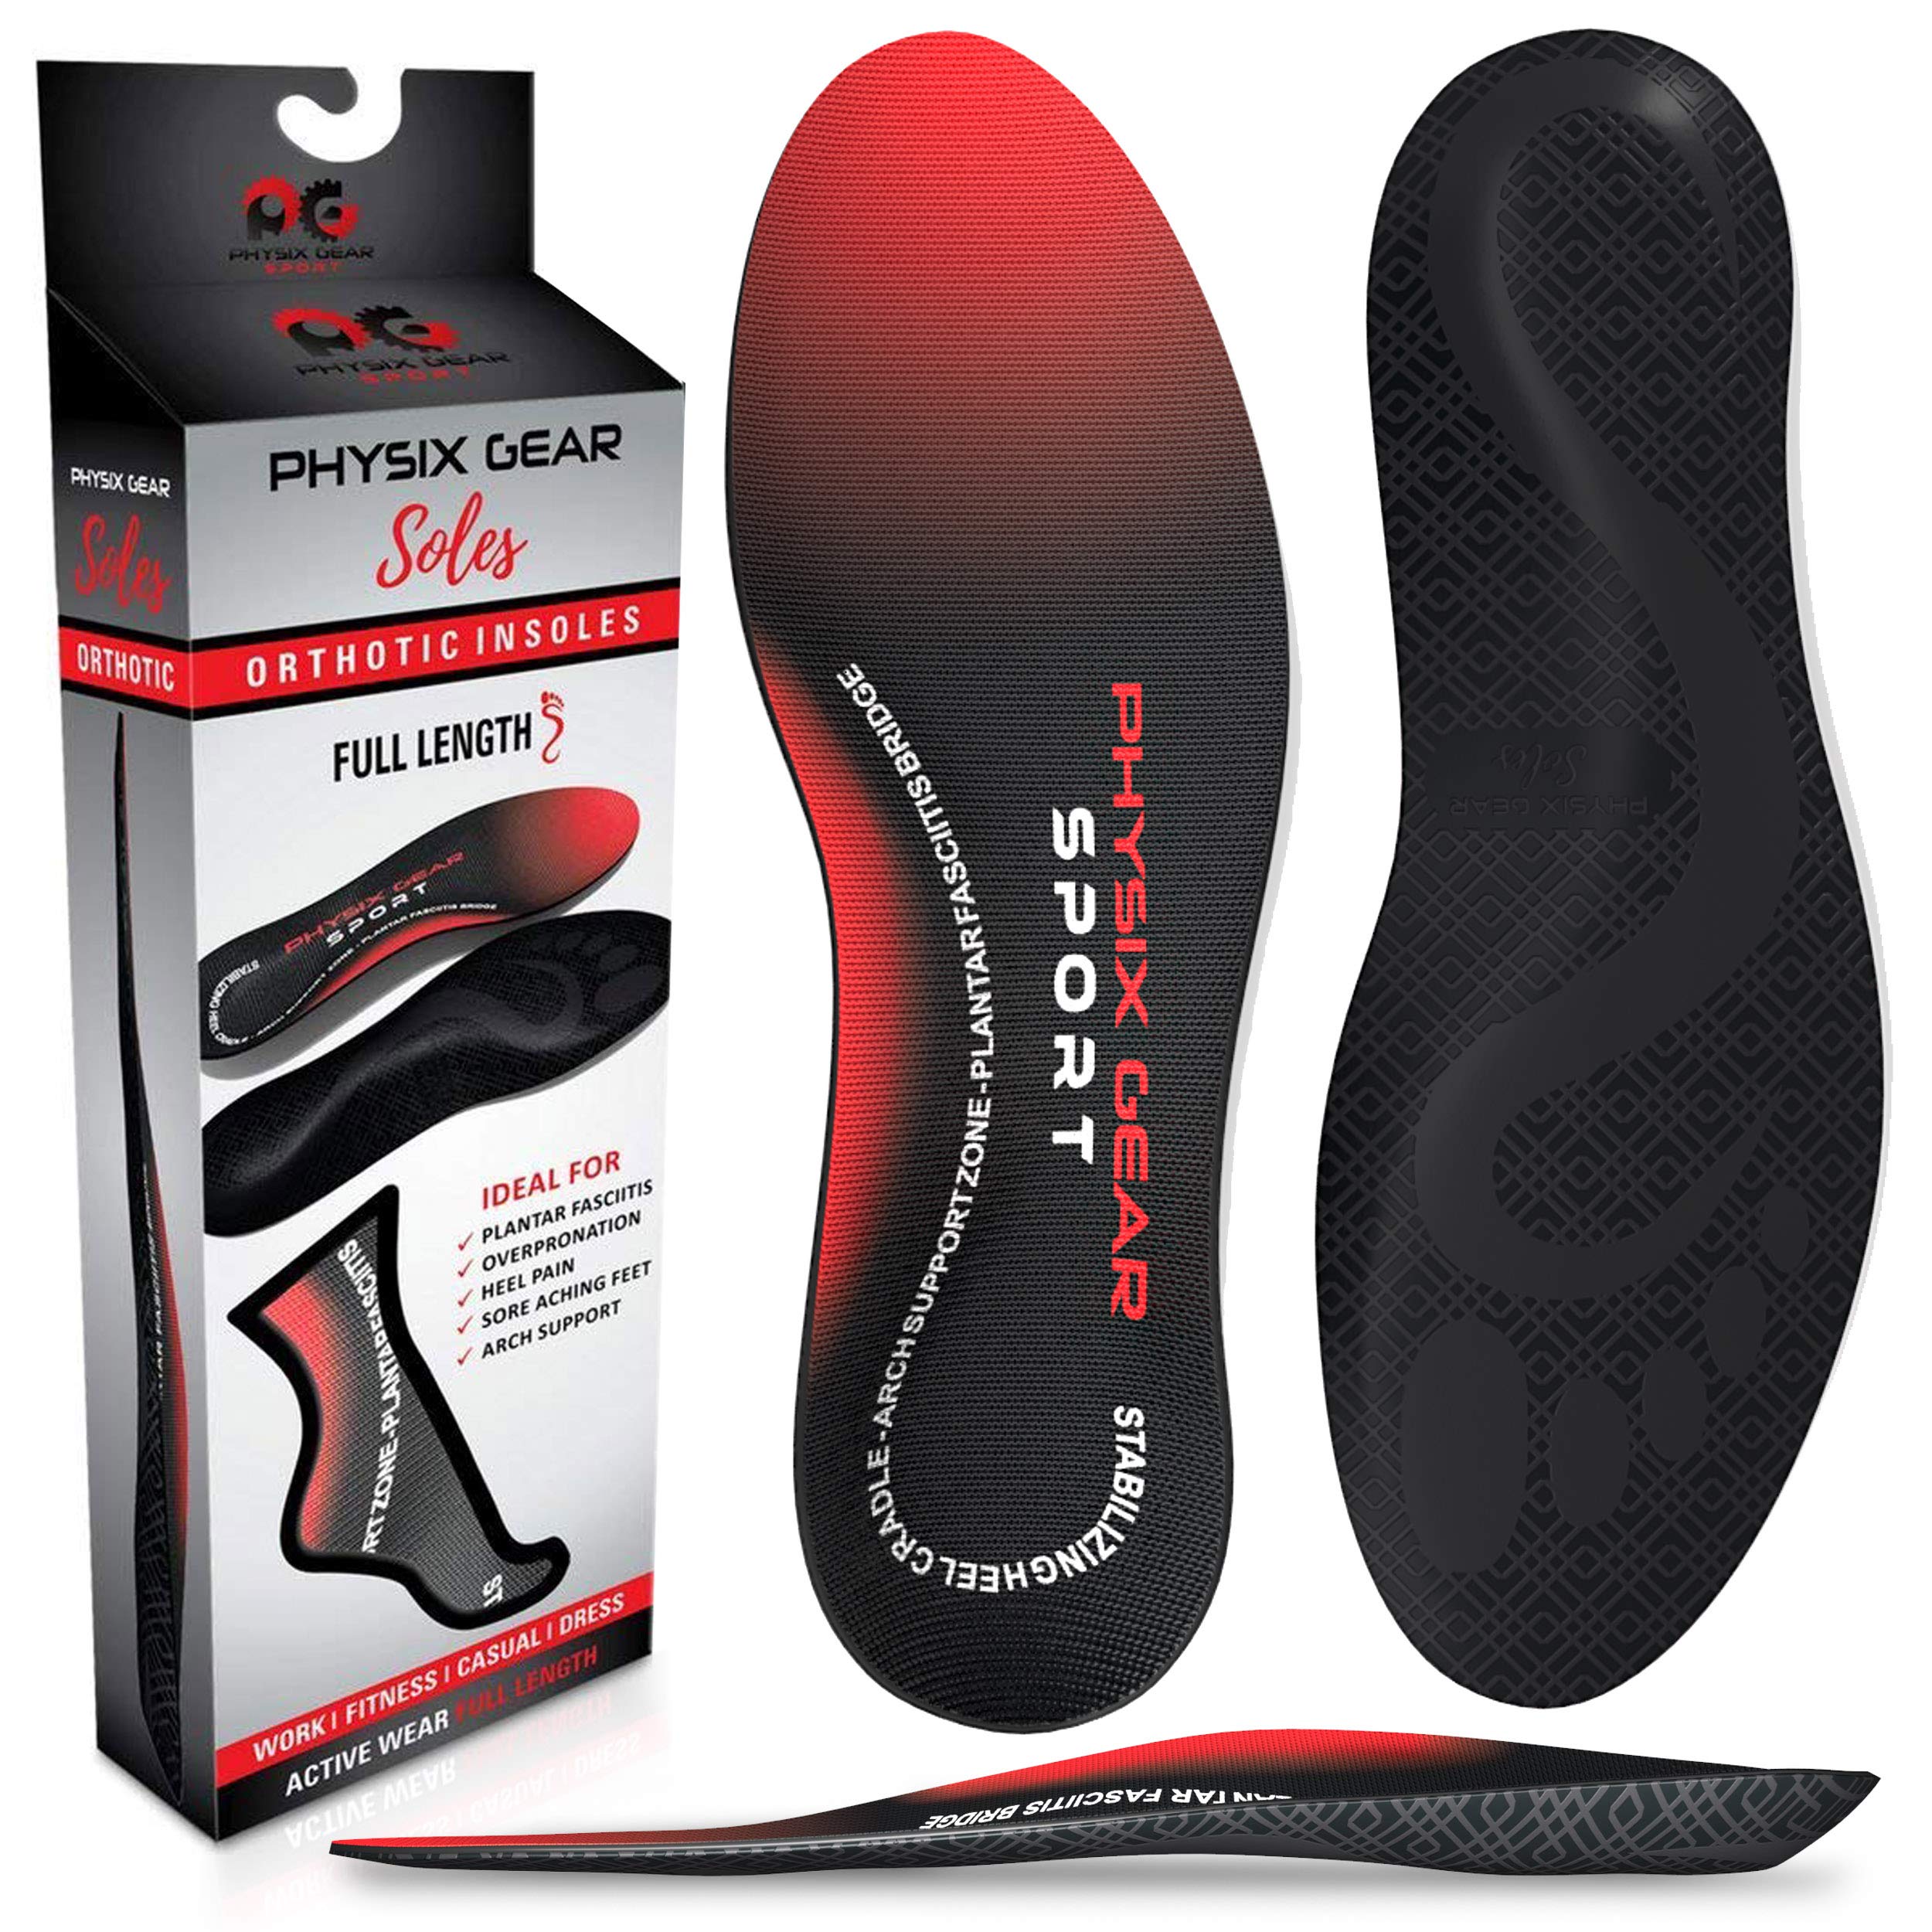 Physix Gear Sport Arch Support Insoles Men  Women by Physix gear Sport - Orthotic Inserts for Plantar Fasciitis Relief, Flat Foot, High Arches, Sh